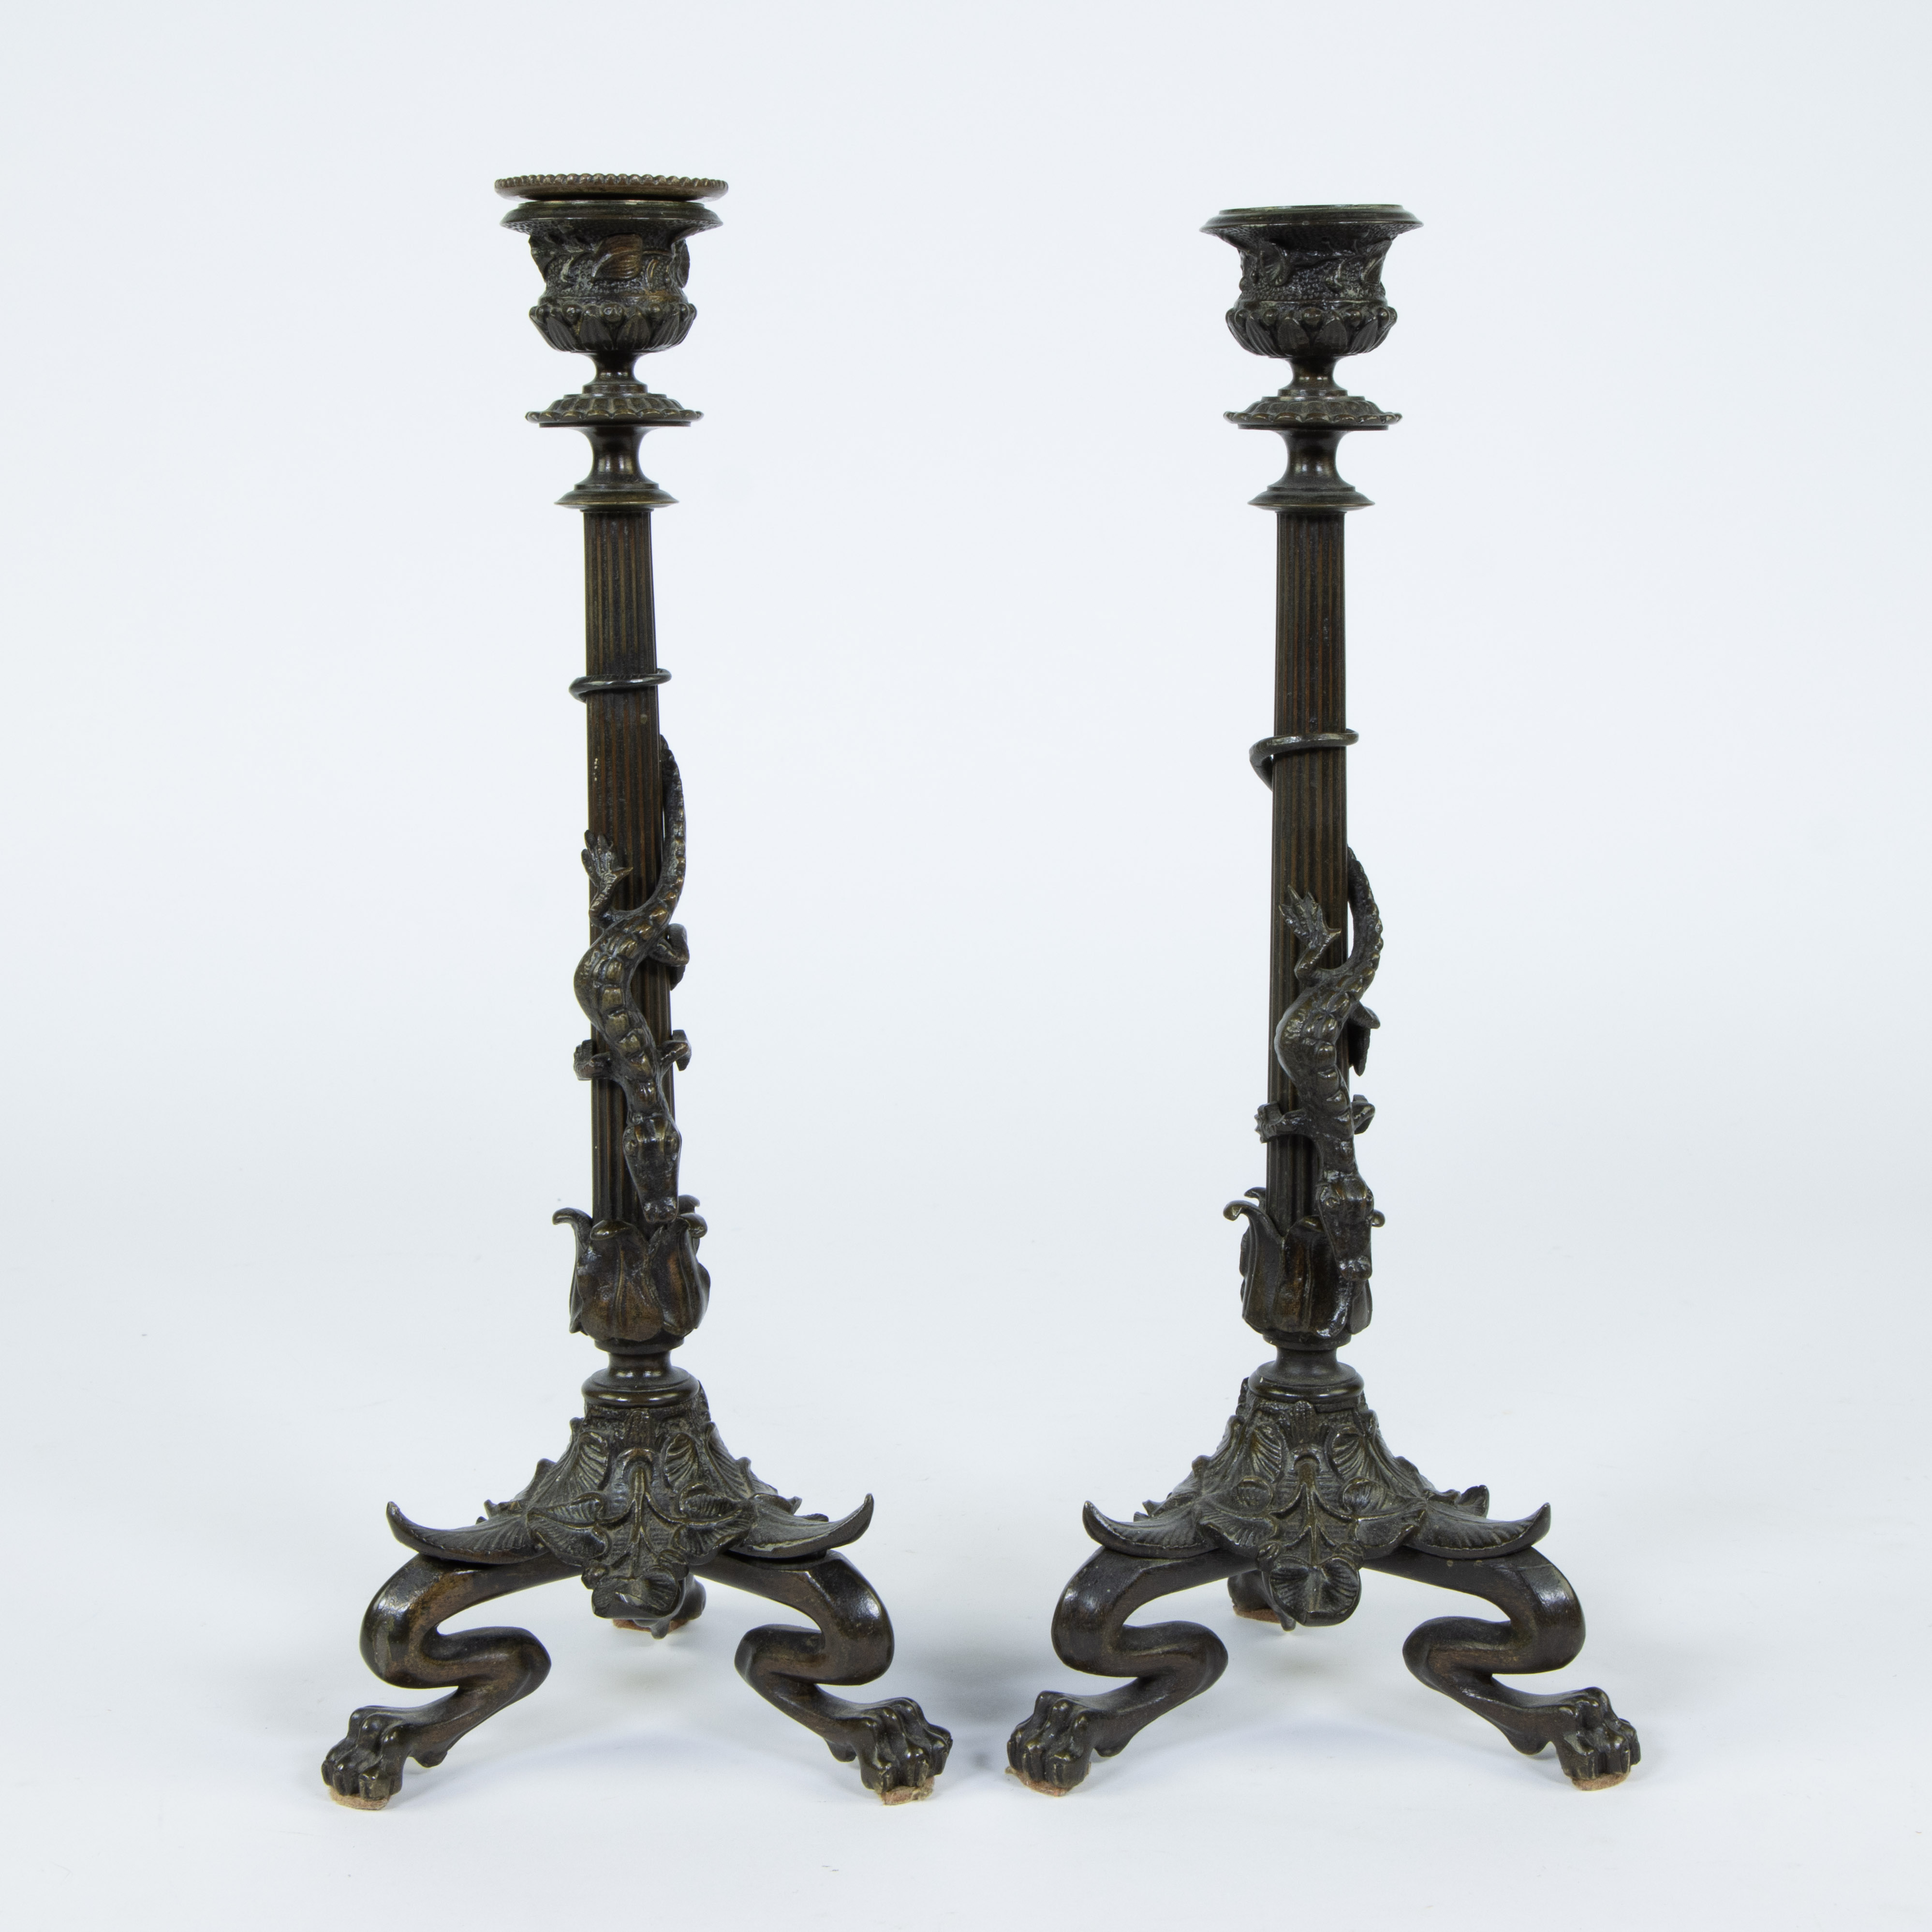 Pair of bronze candlesticks on lion feet decorated with a crocodile, Barbedienne, 19th century